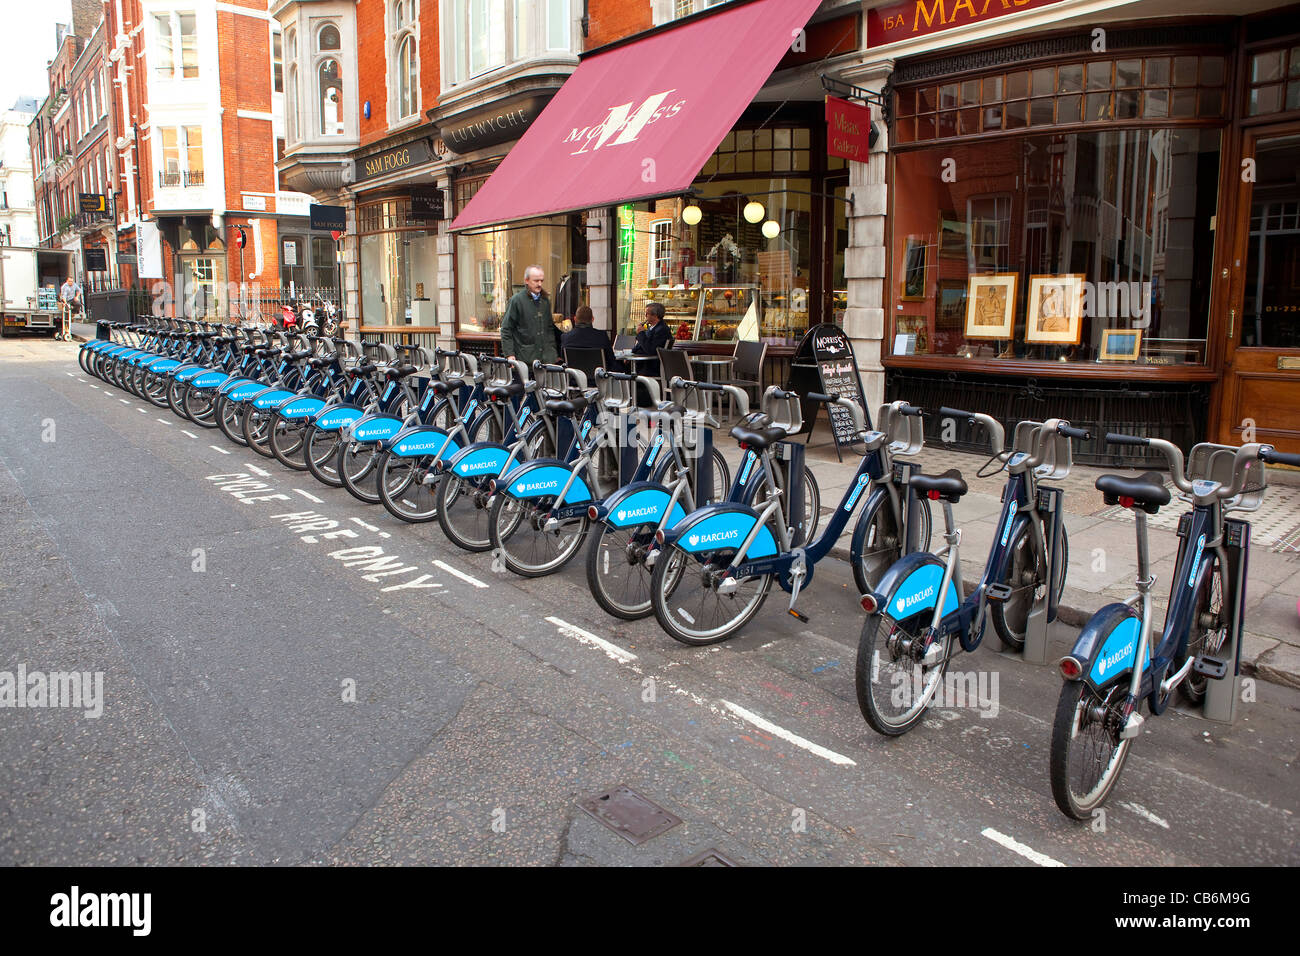 Barclays sponsored Bikes for hire on London, Great Britain. Stock Photo